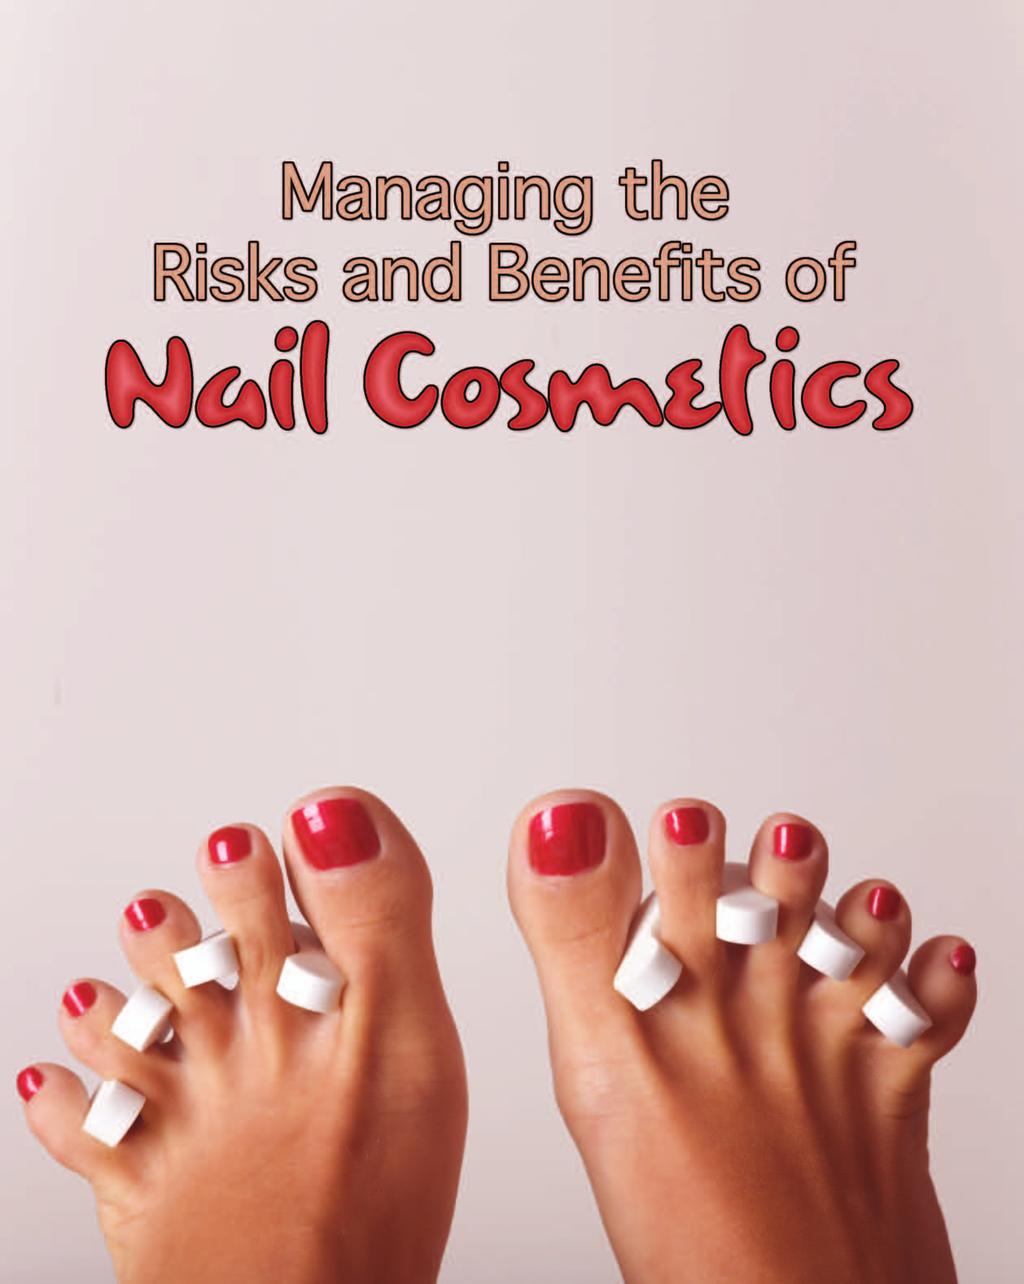 Nail cosmetics are big business in the US.